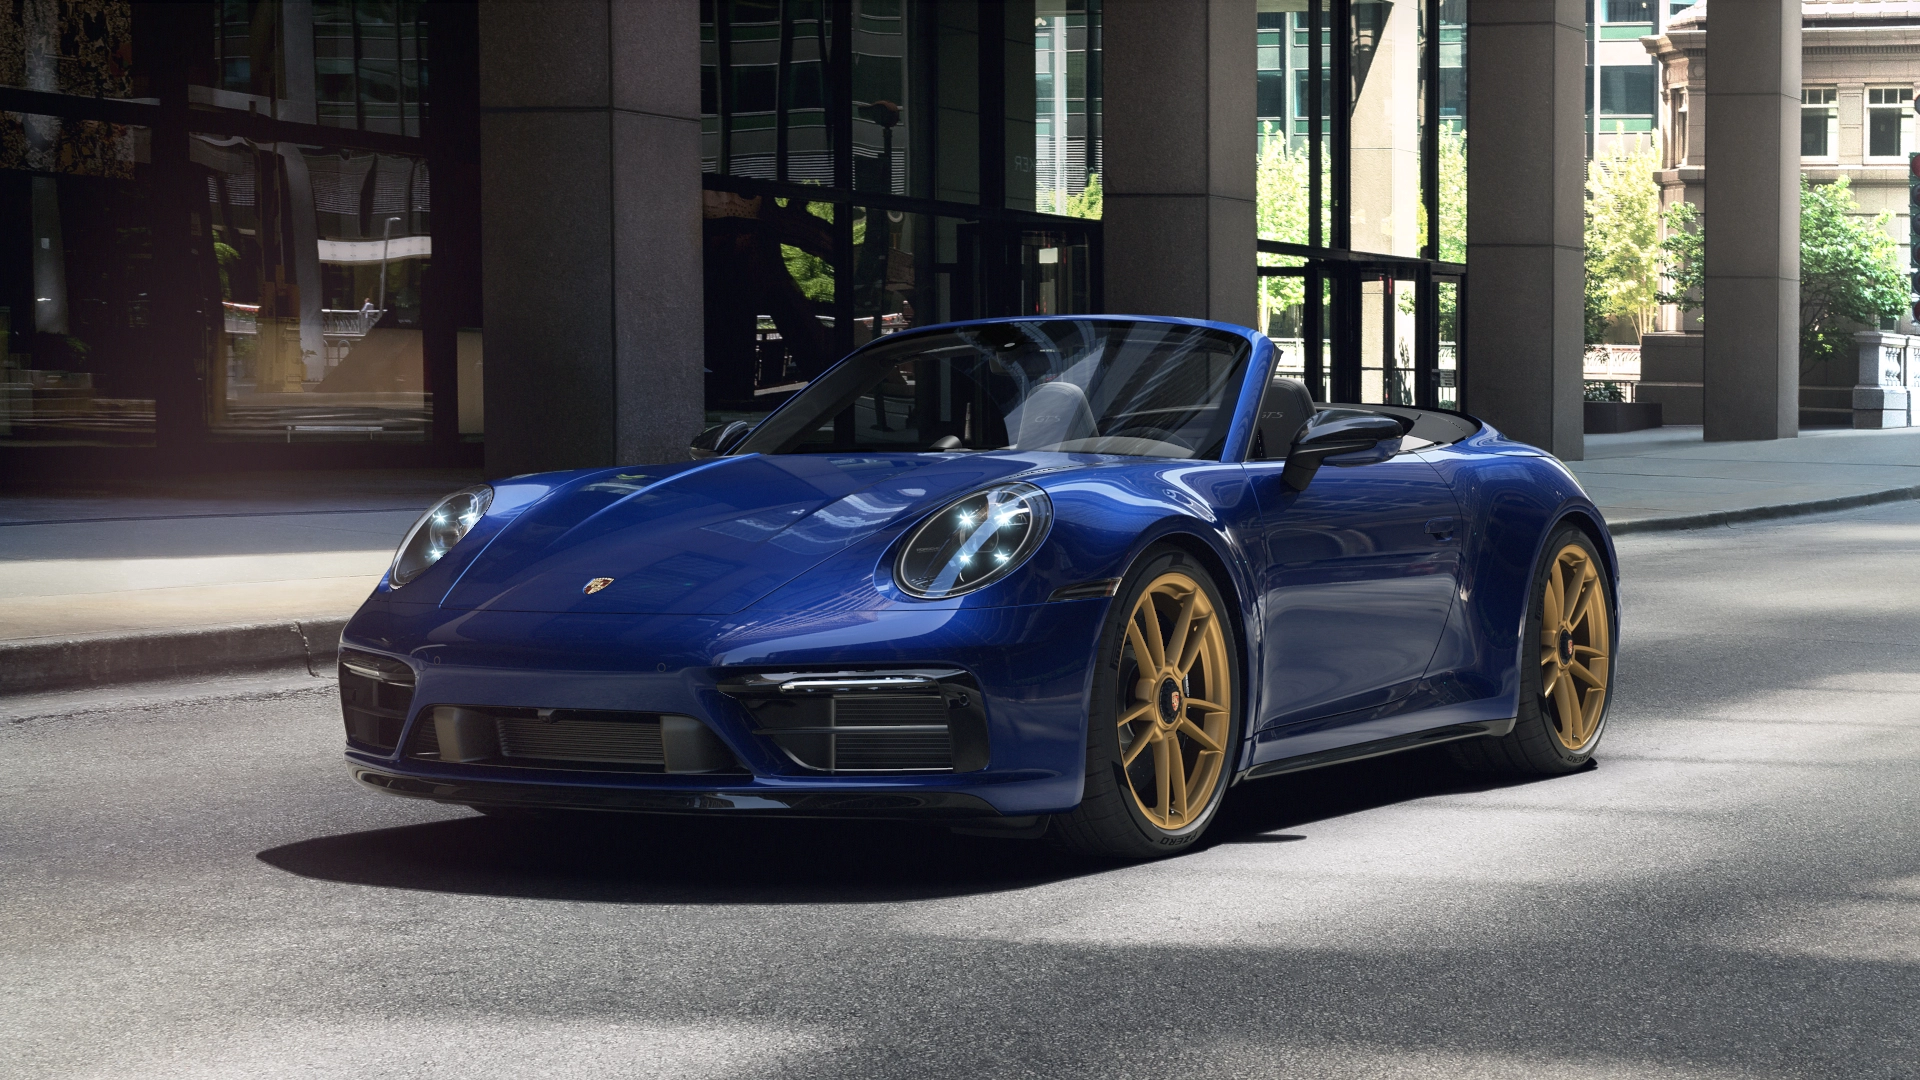 911 Carrera 4 GTS Cabriolet front view